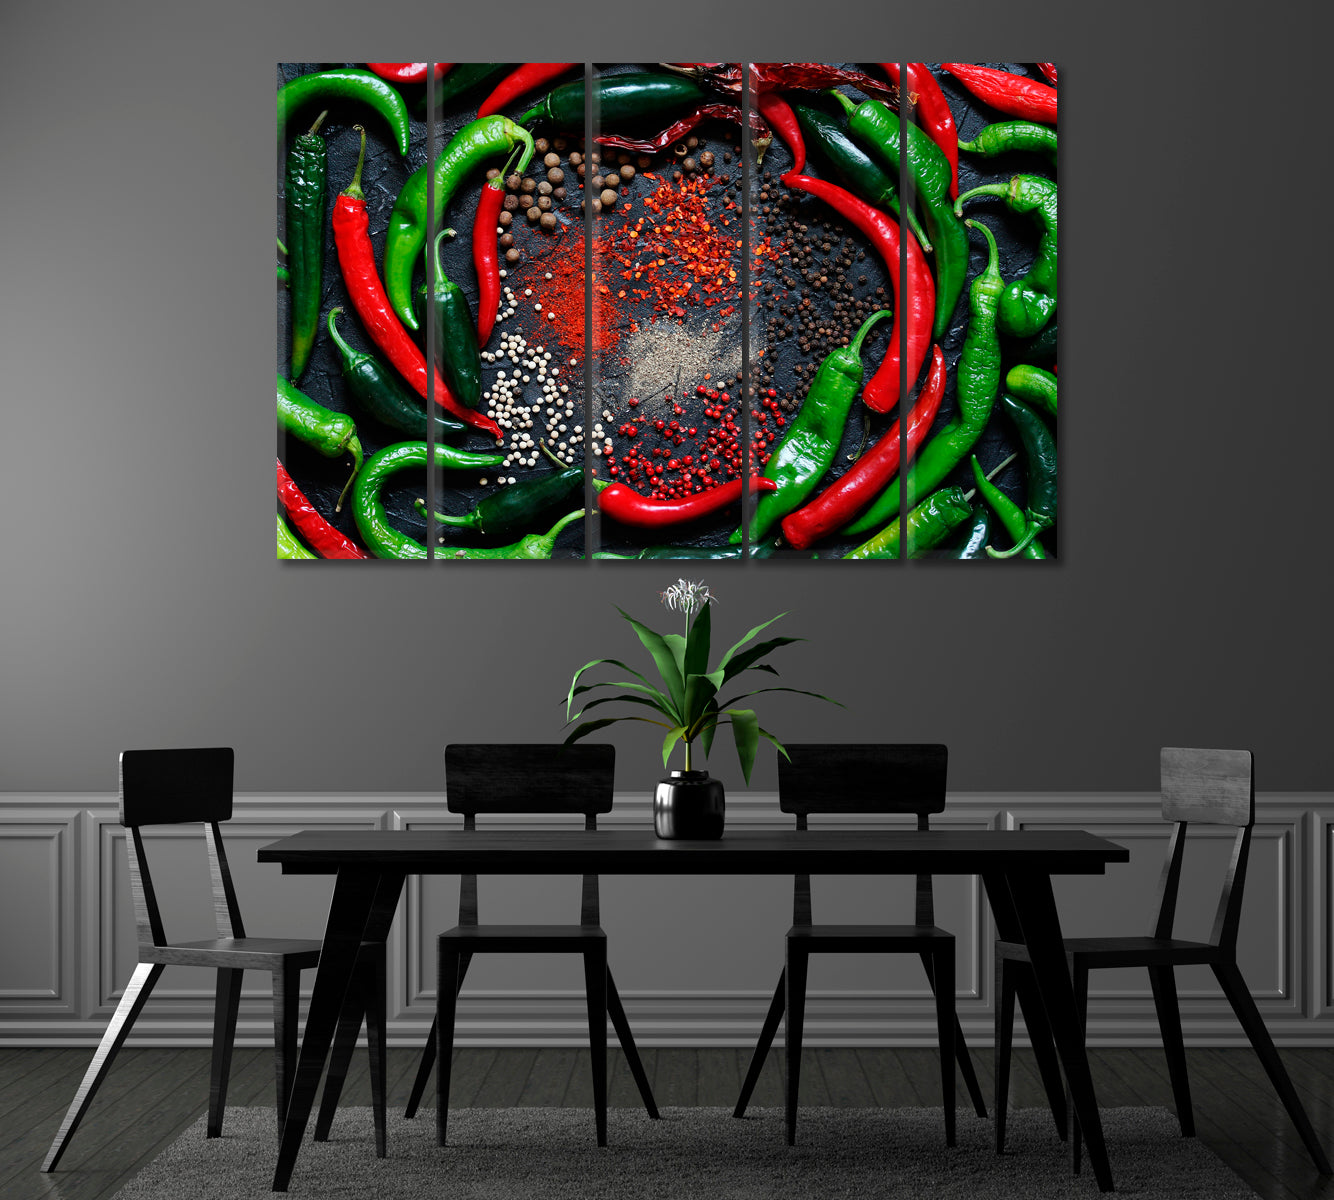 Chili Peppers Canvas Print ArtLexy 5 Panels 36"x24" inches 